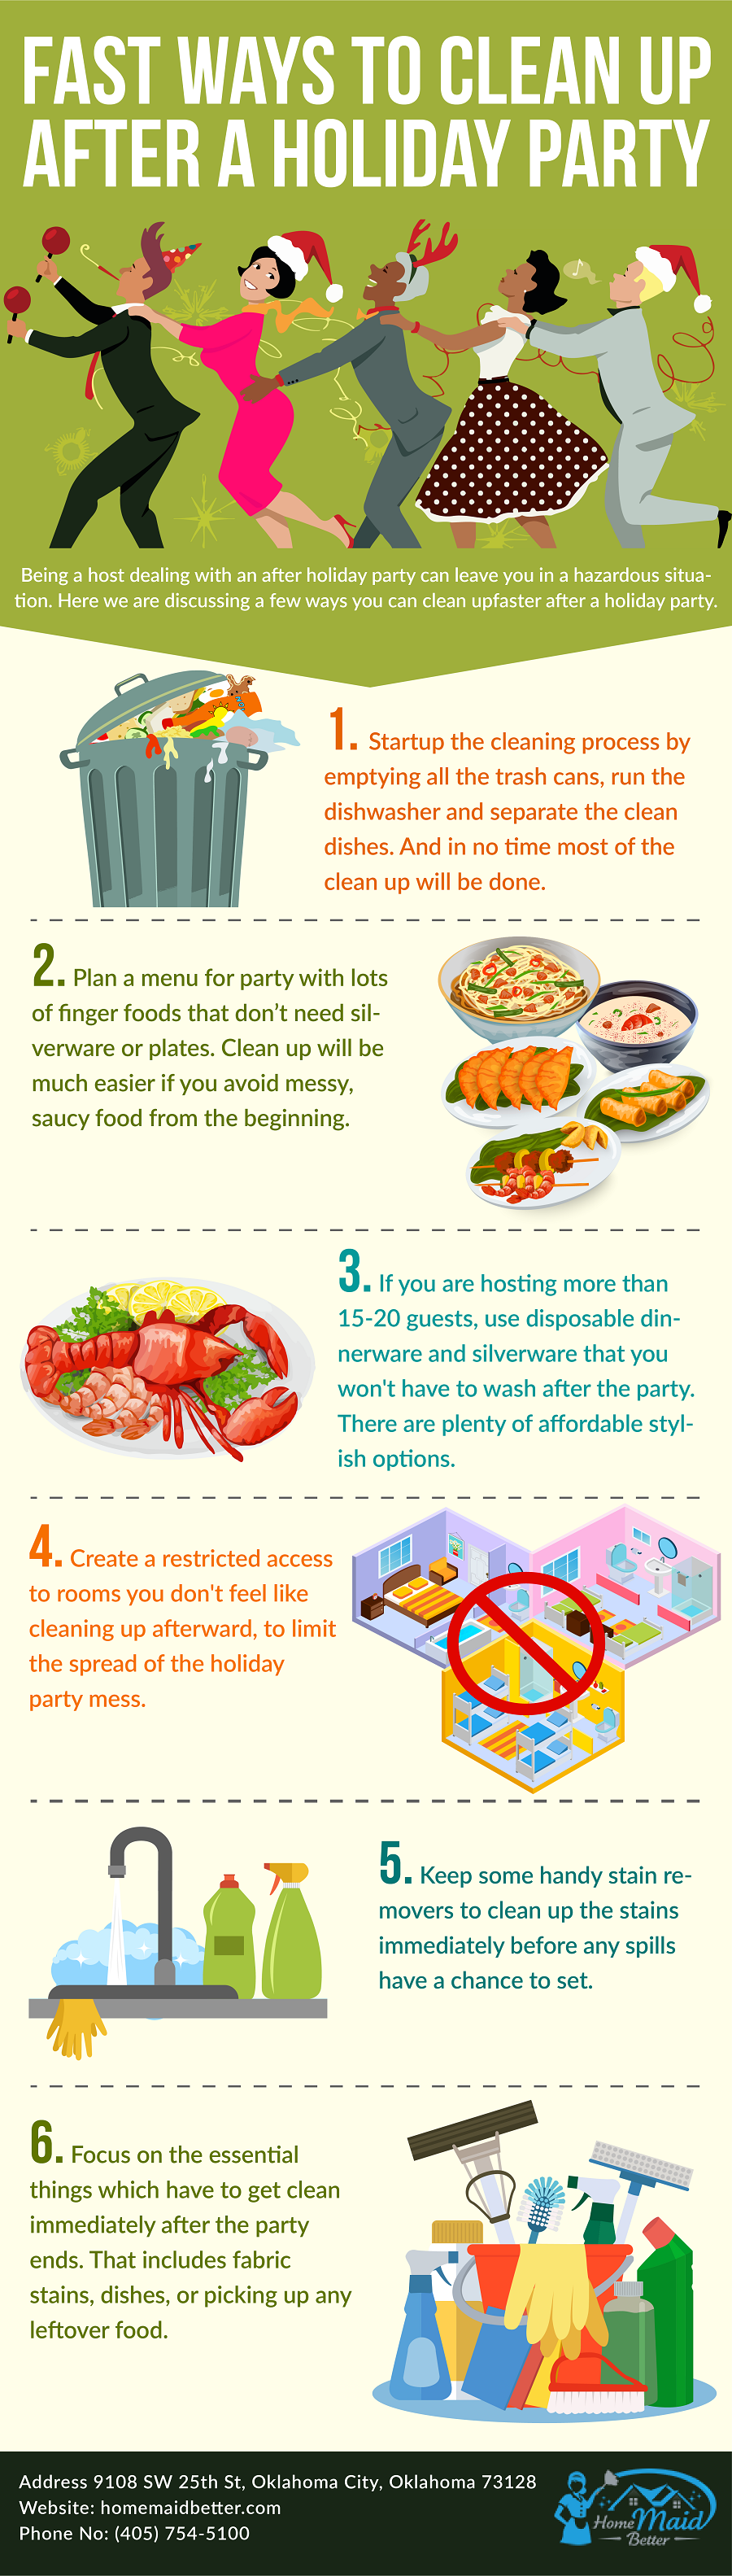 Fast Ways To CLean Up After A Holiday Party